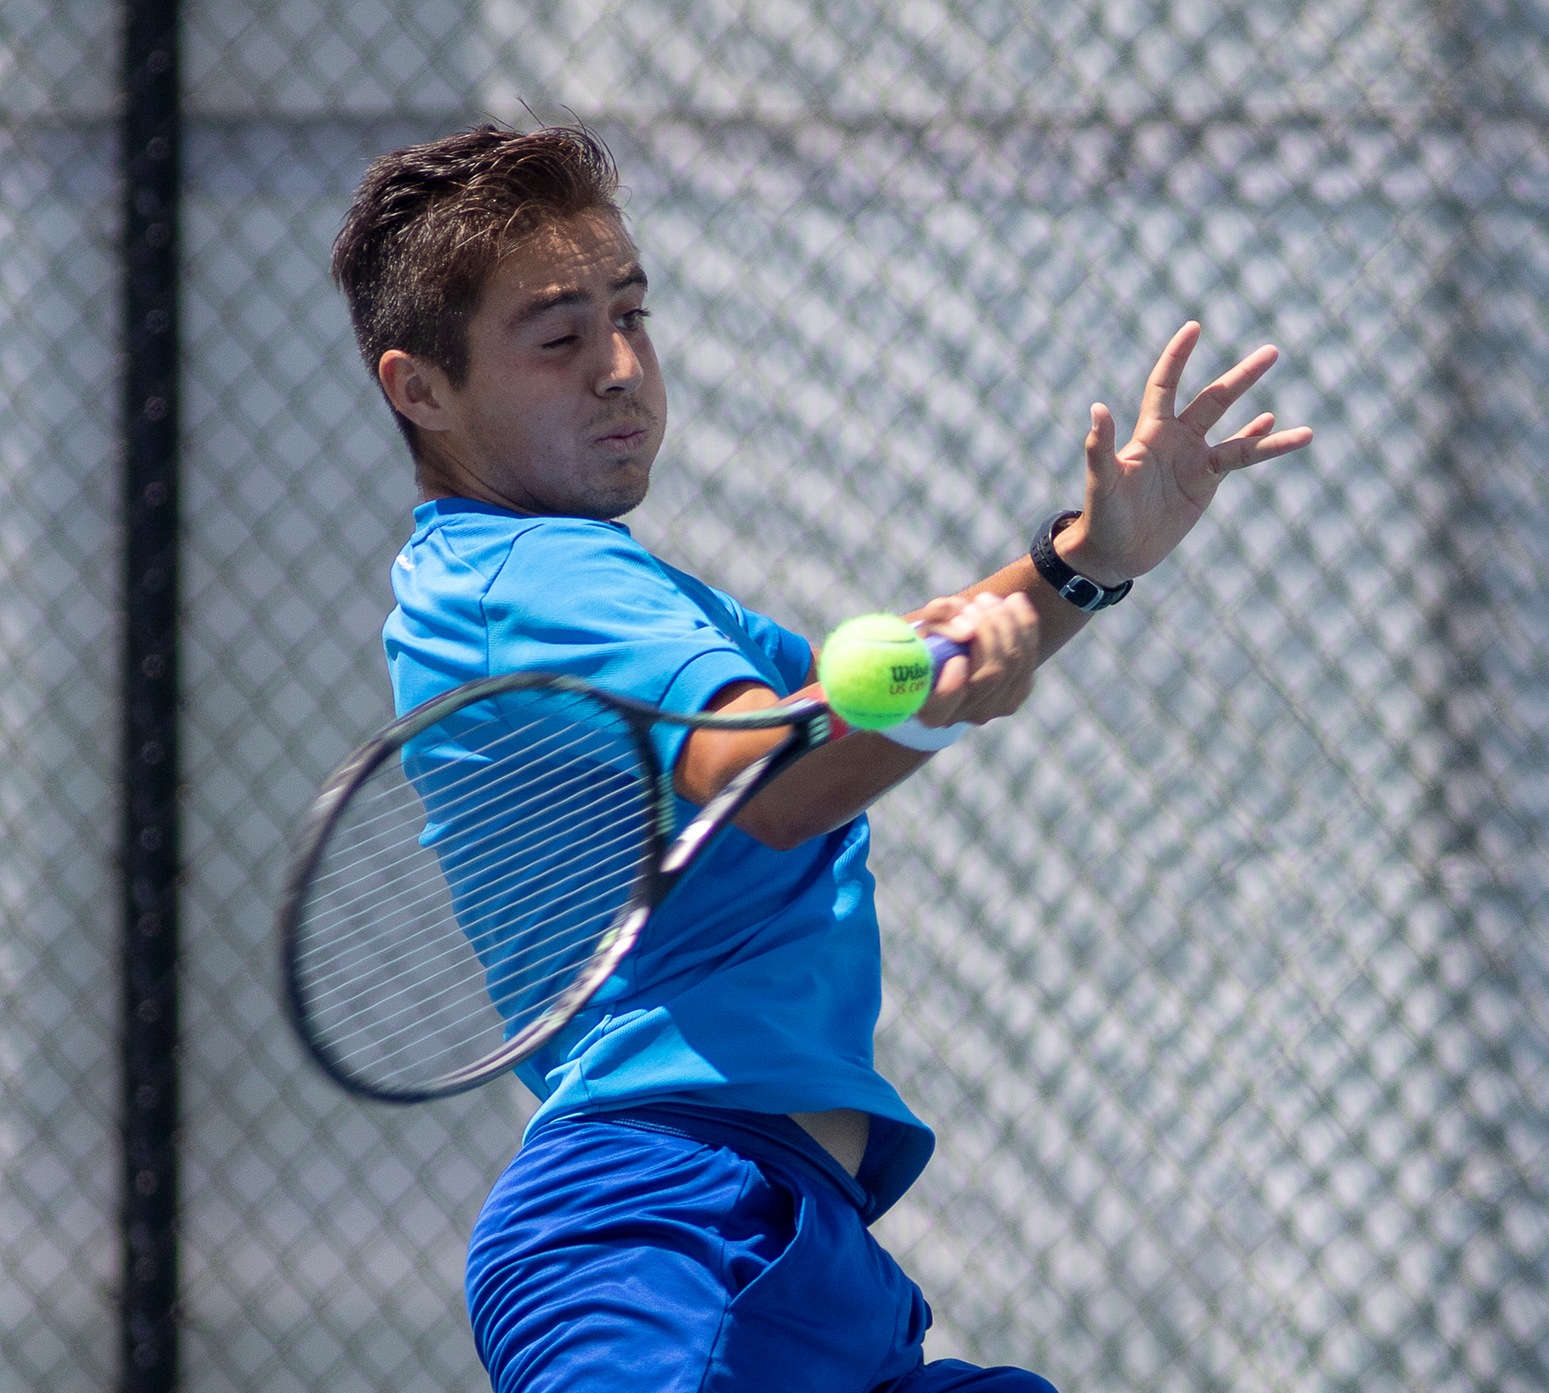 Men's tennis team finishes tied for fourth in national tournament